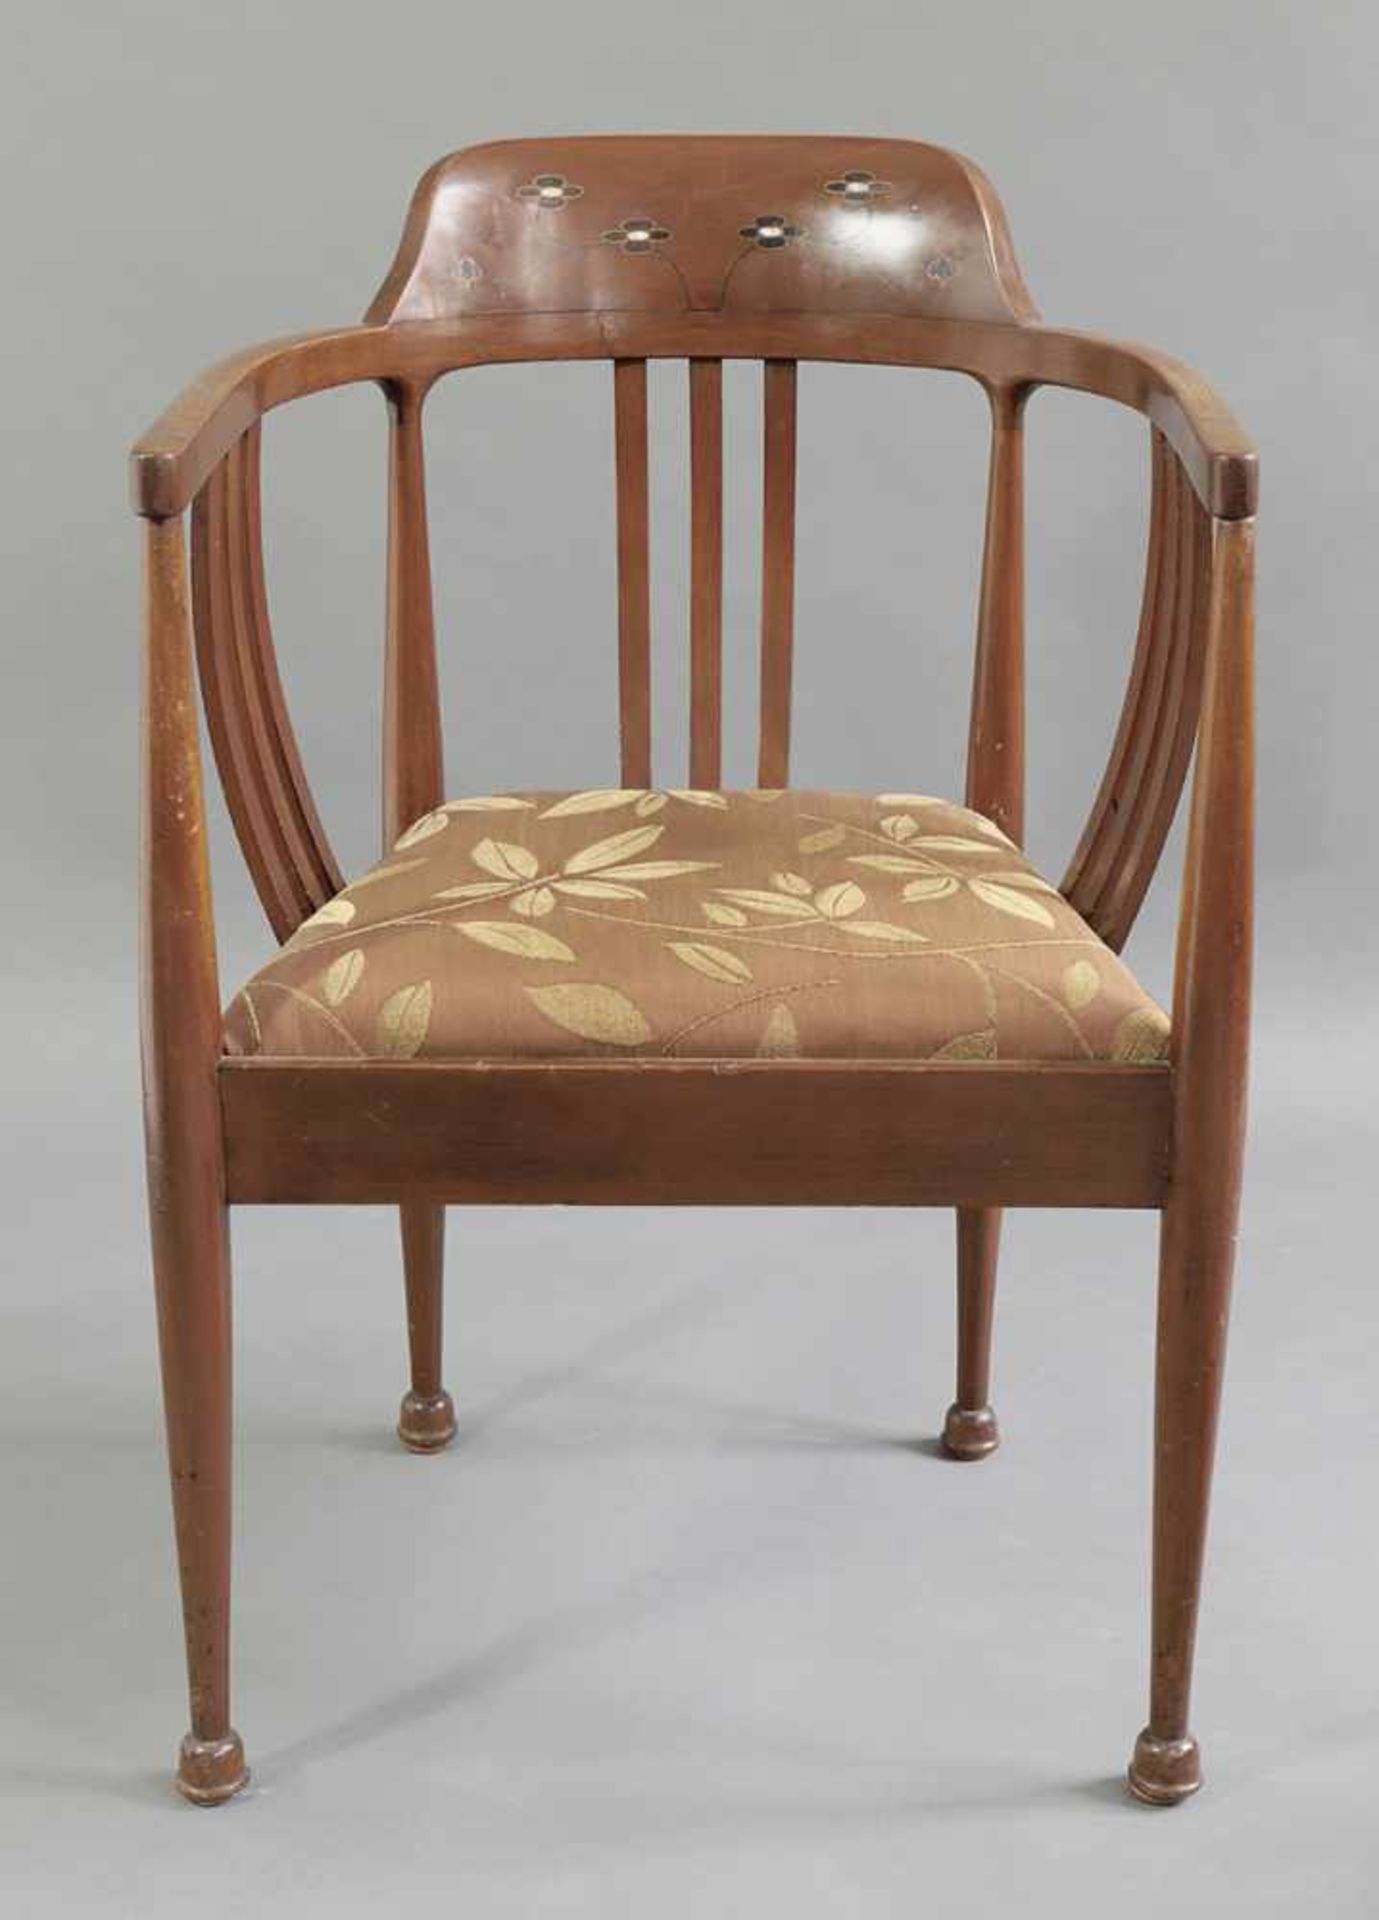 2 Arts and Crafts armchairs, England2 Arts and Crafts armchairs. Around 1900. Wood. Backrest with - Bild 2 aus 4